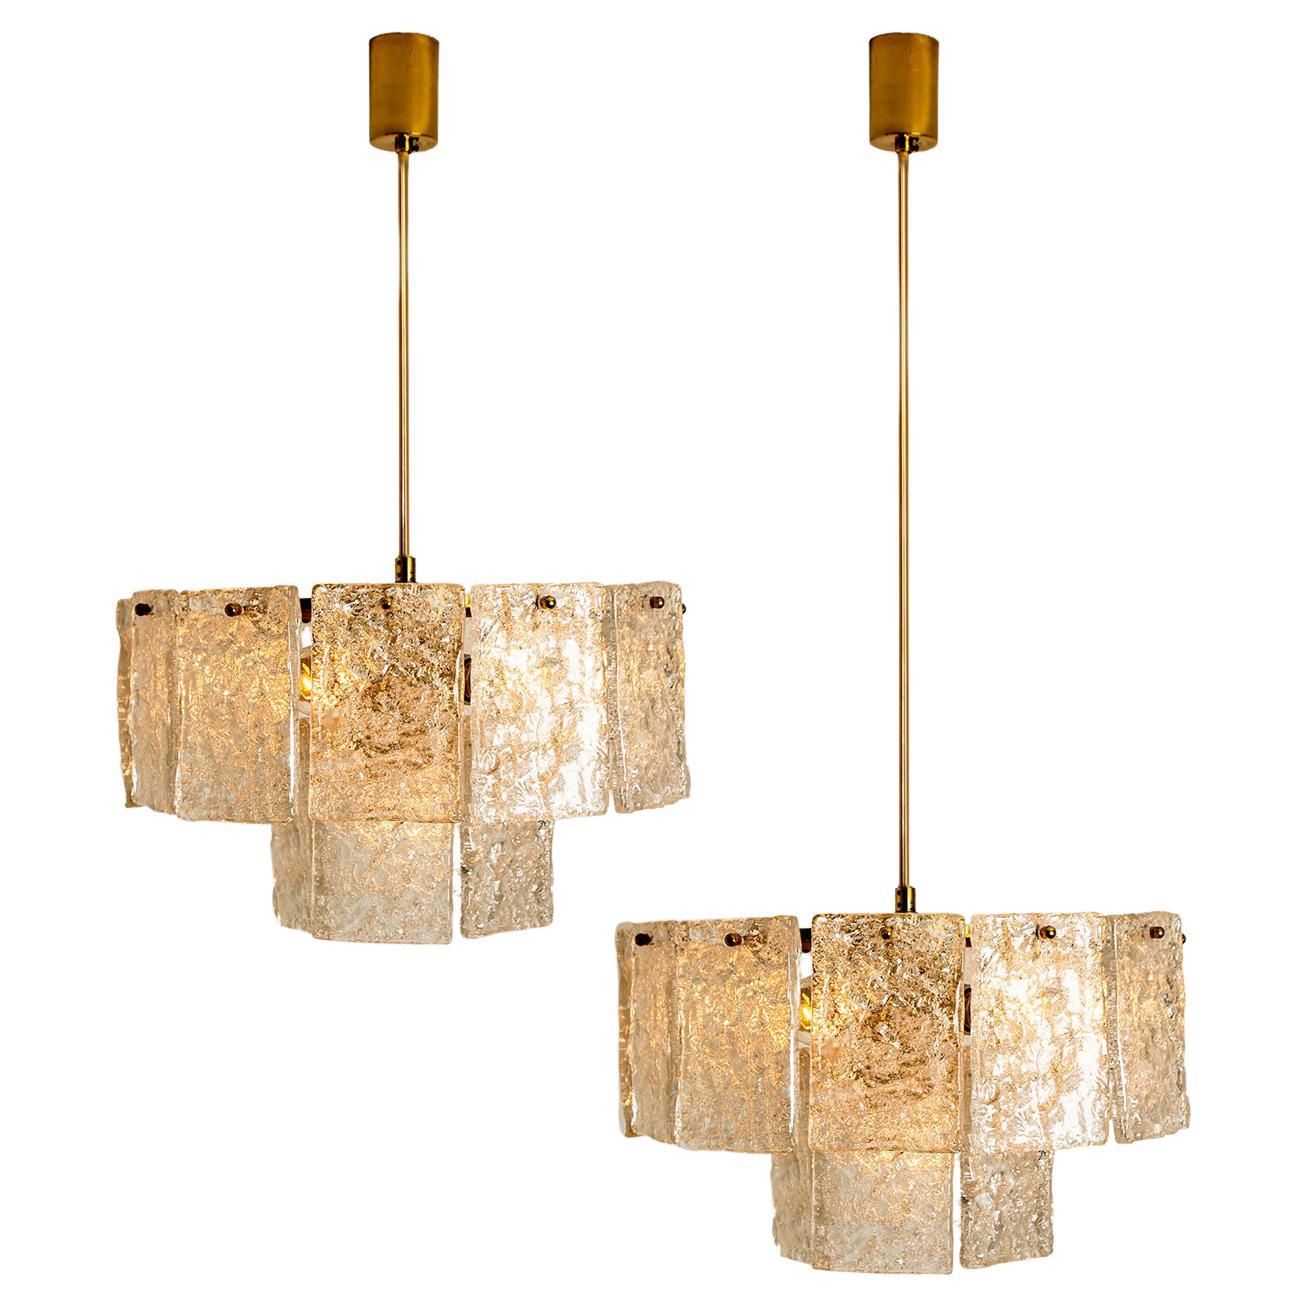 These sculptural chandeliers with a design of textured rectangular glass plates are from the historical lighting company Hillebrand,. Manufactured in mid century, circa 1970 (late 1960s or early 1970s).

The fixture has 18 glass shades. Each clear